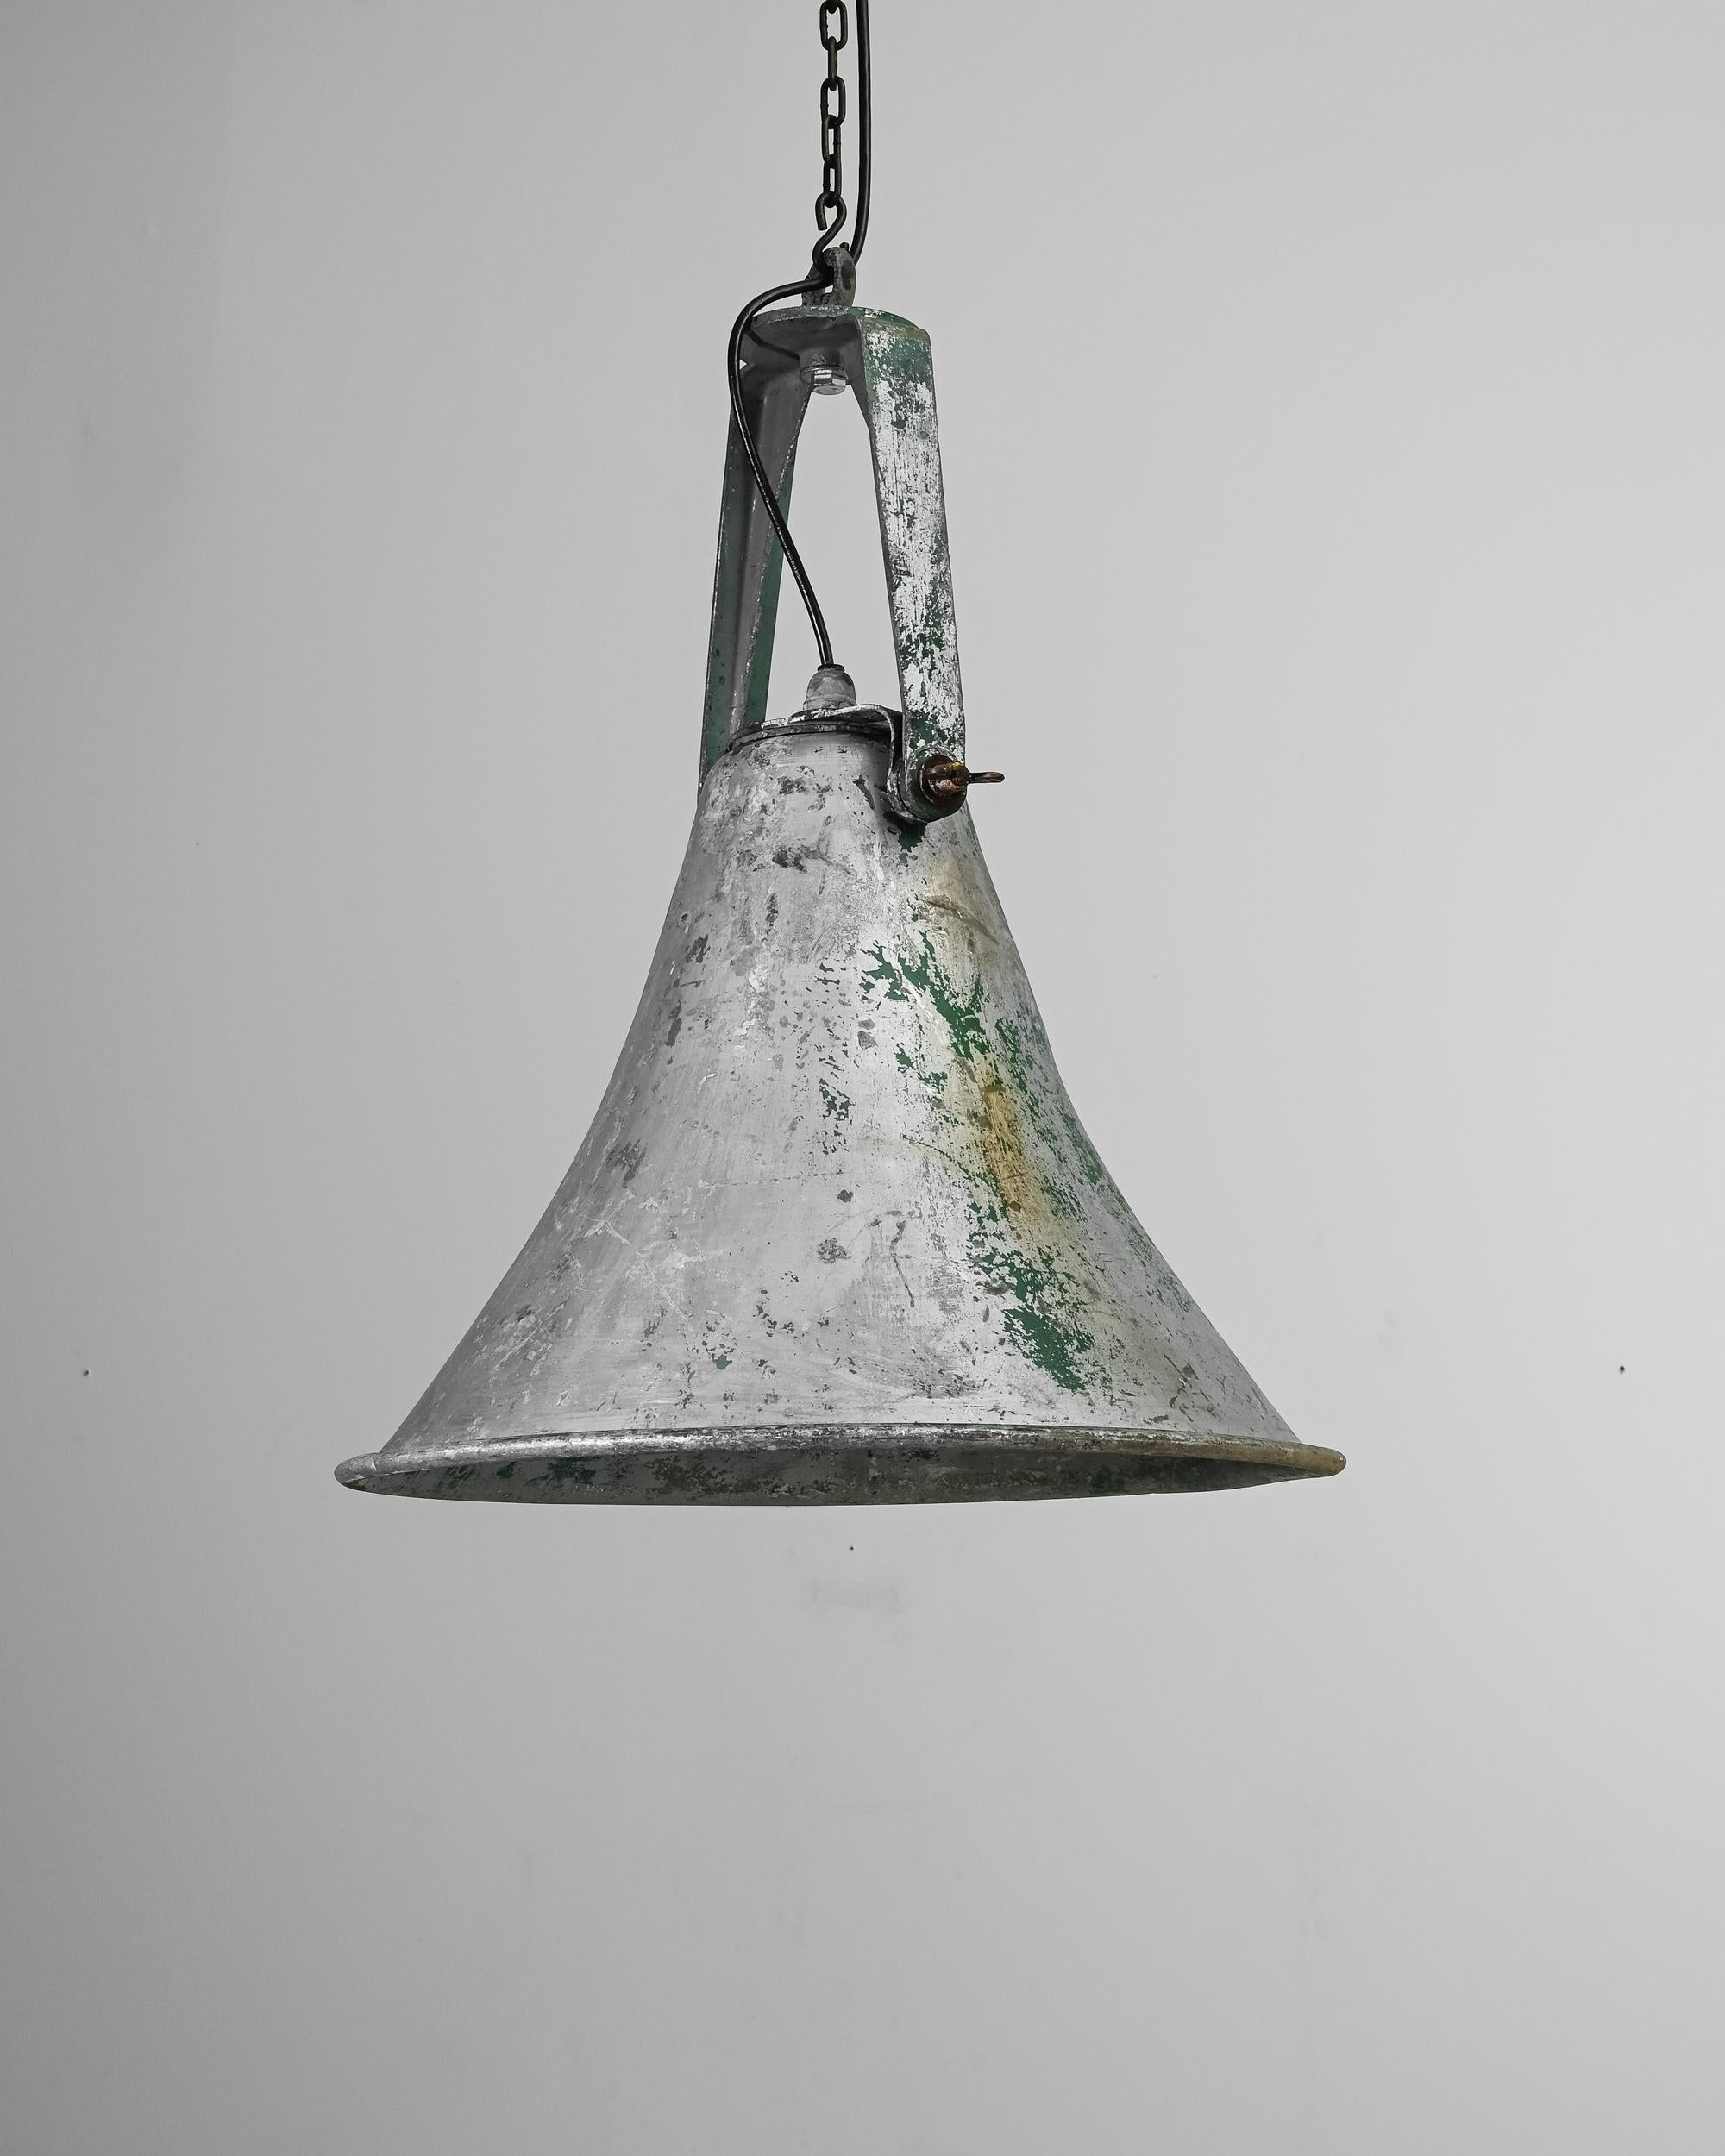 A 20th Century metal lamp from France. Hanging on a chain, the stripped-down metal shade exhibits a patinated interior and a flared silhouette, creating a diffuse light for a warm atmosphere. The bottle green specks lend the piece a rustic elegance,